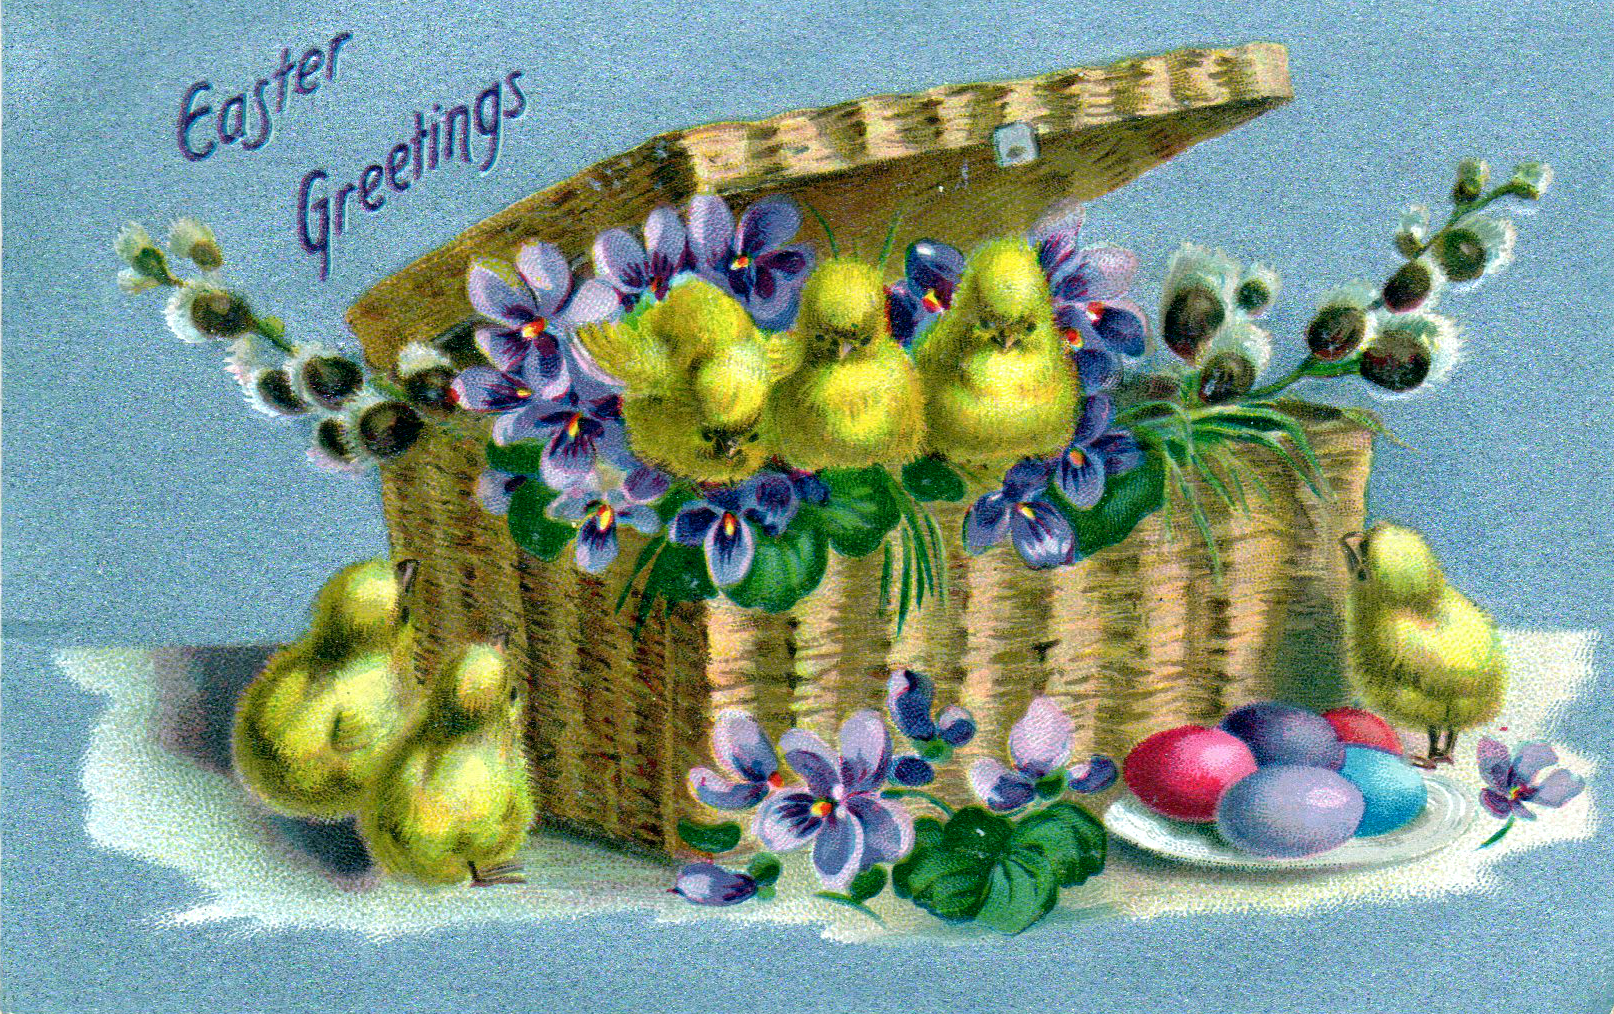 This is a free vintage illustration of Easter chicks and basket from an antique Easter postcard